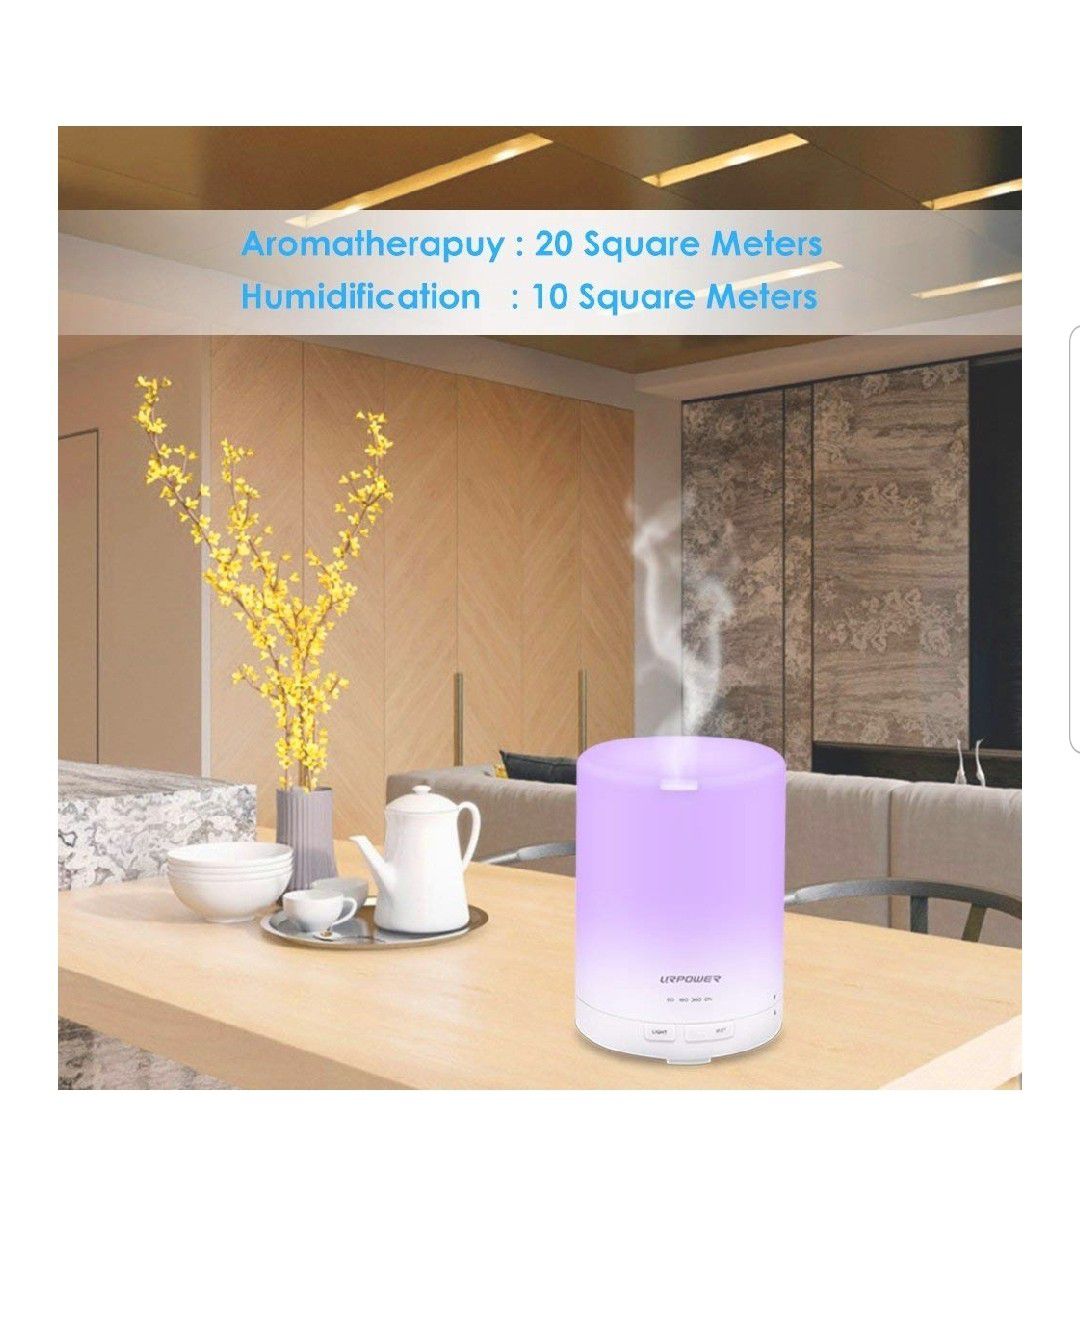 Aroma Essential Oil Diffuser Night Light Ultrasonic Air Humidifier with AUTO Shut off and 6-7 HOURS Continuous Diffusing